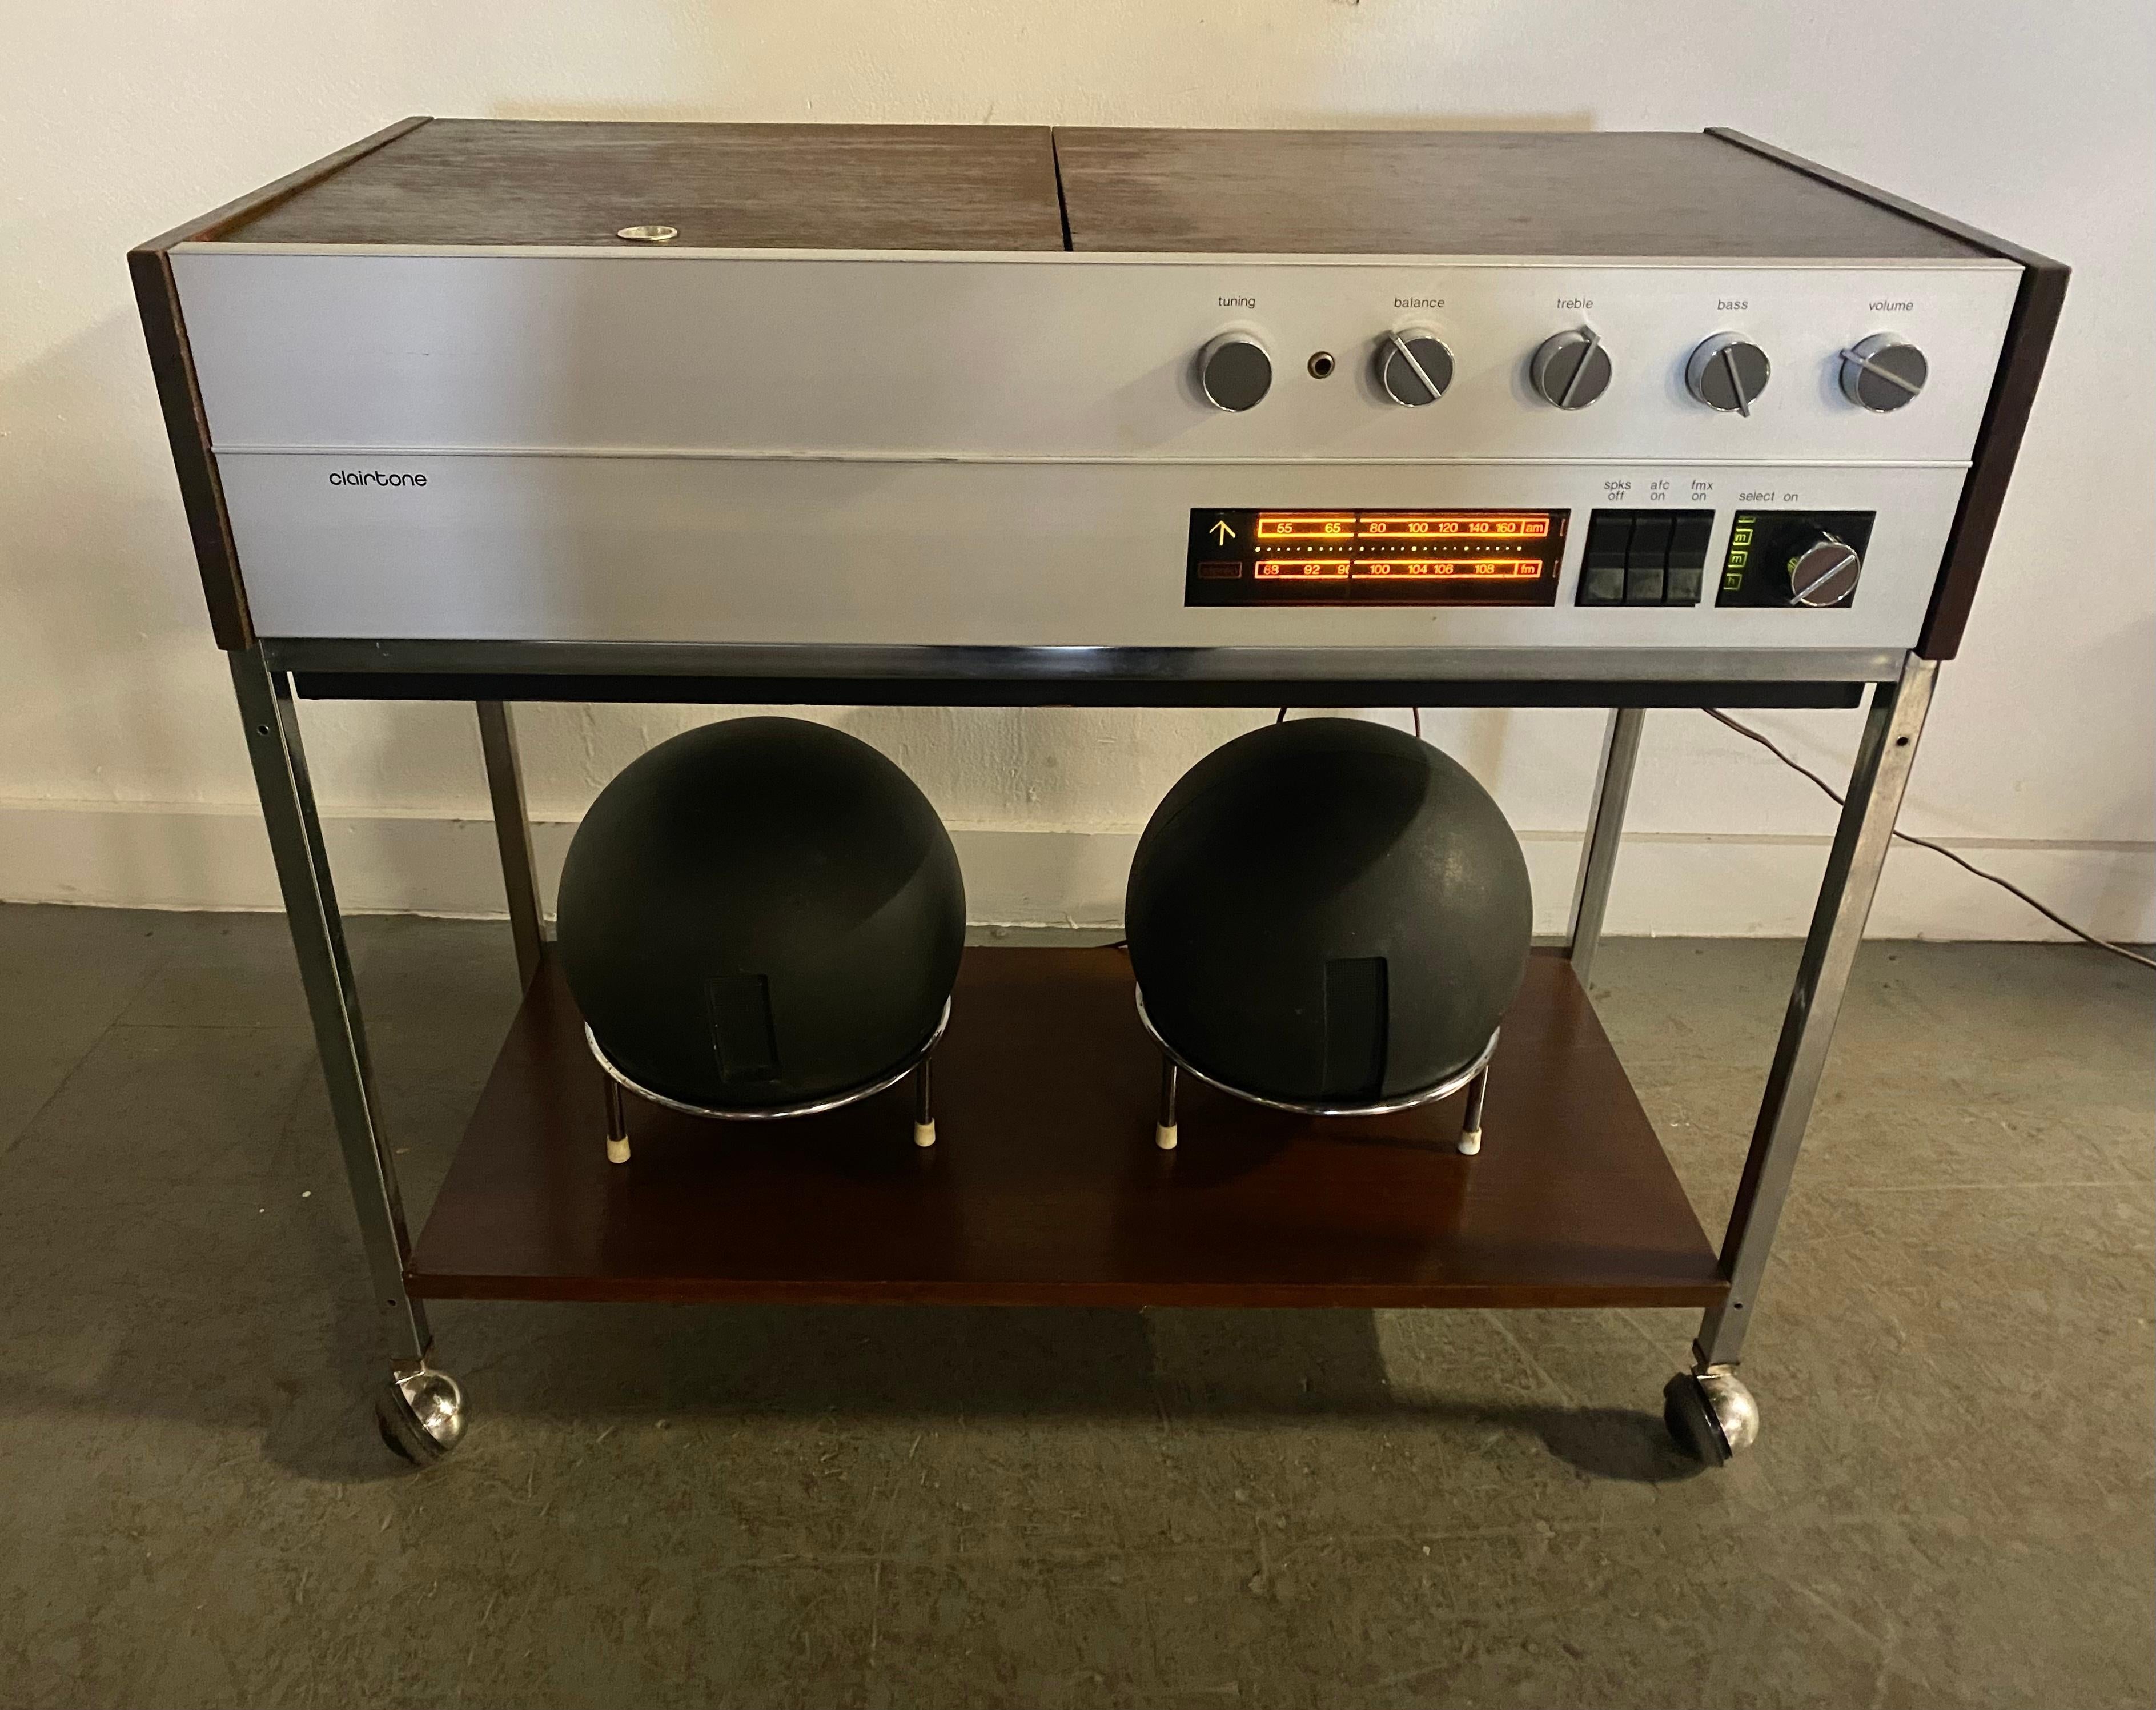 Canadian Modernist Space Age Clairtone G3 T13 Stereo System with Globe Speakers For Sale